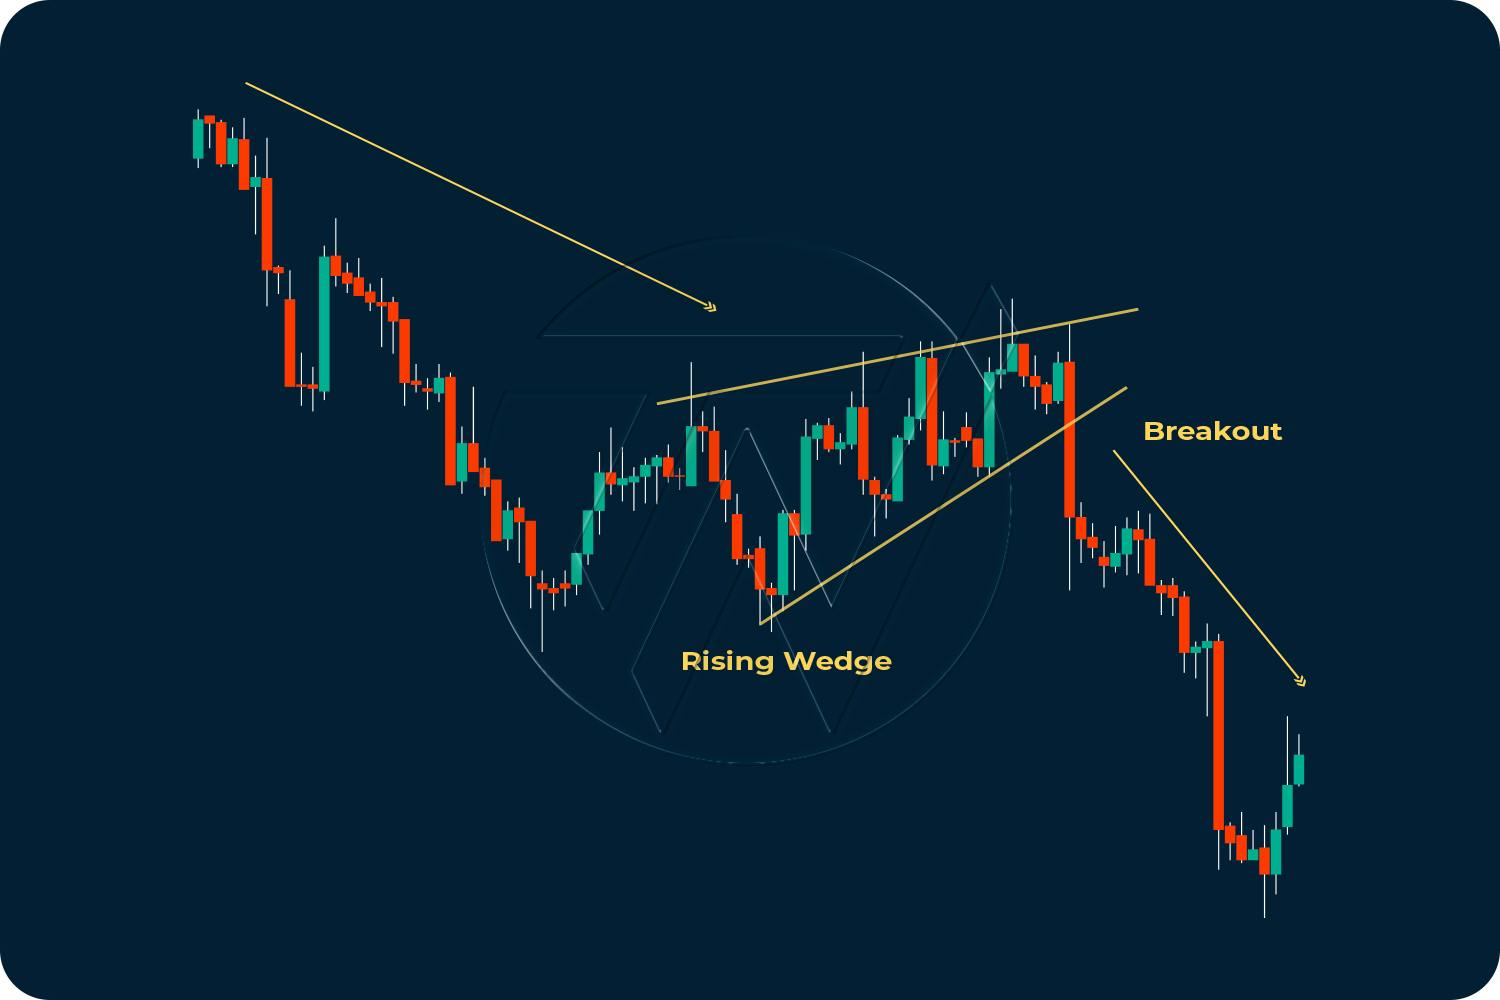 Candlestick chart patterns illustrating rising wedge breakout